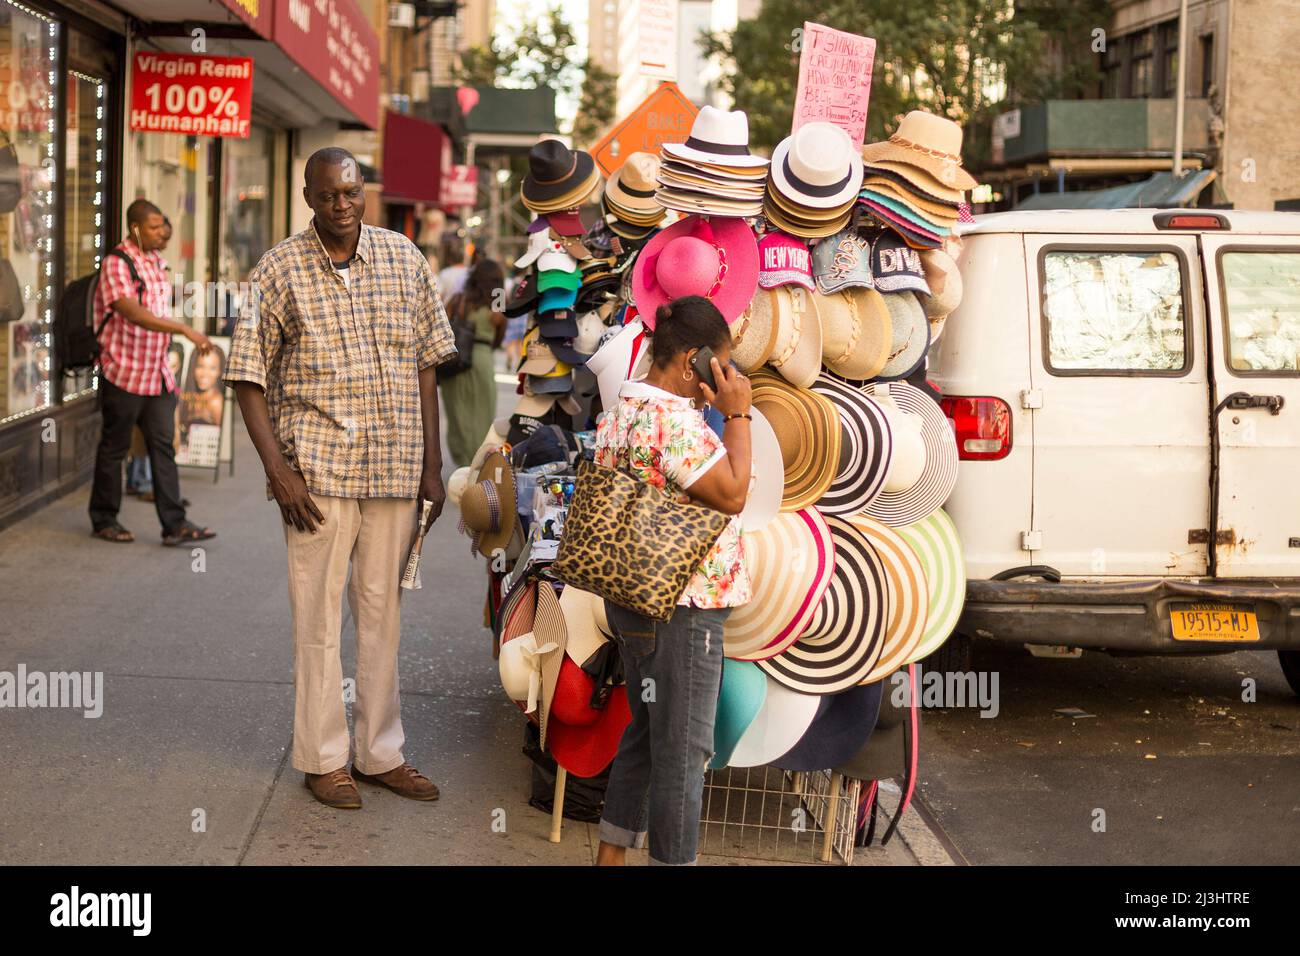 28 Street, New York City, NY, USA, A street vendor in Manhattan sells Souvenirs and Hats Stock Photo